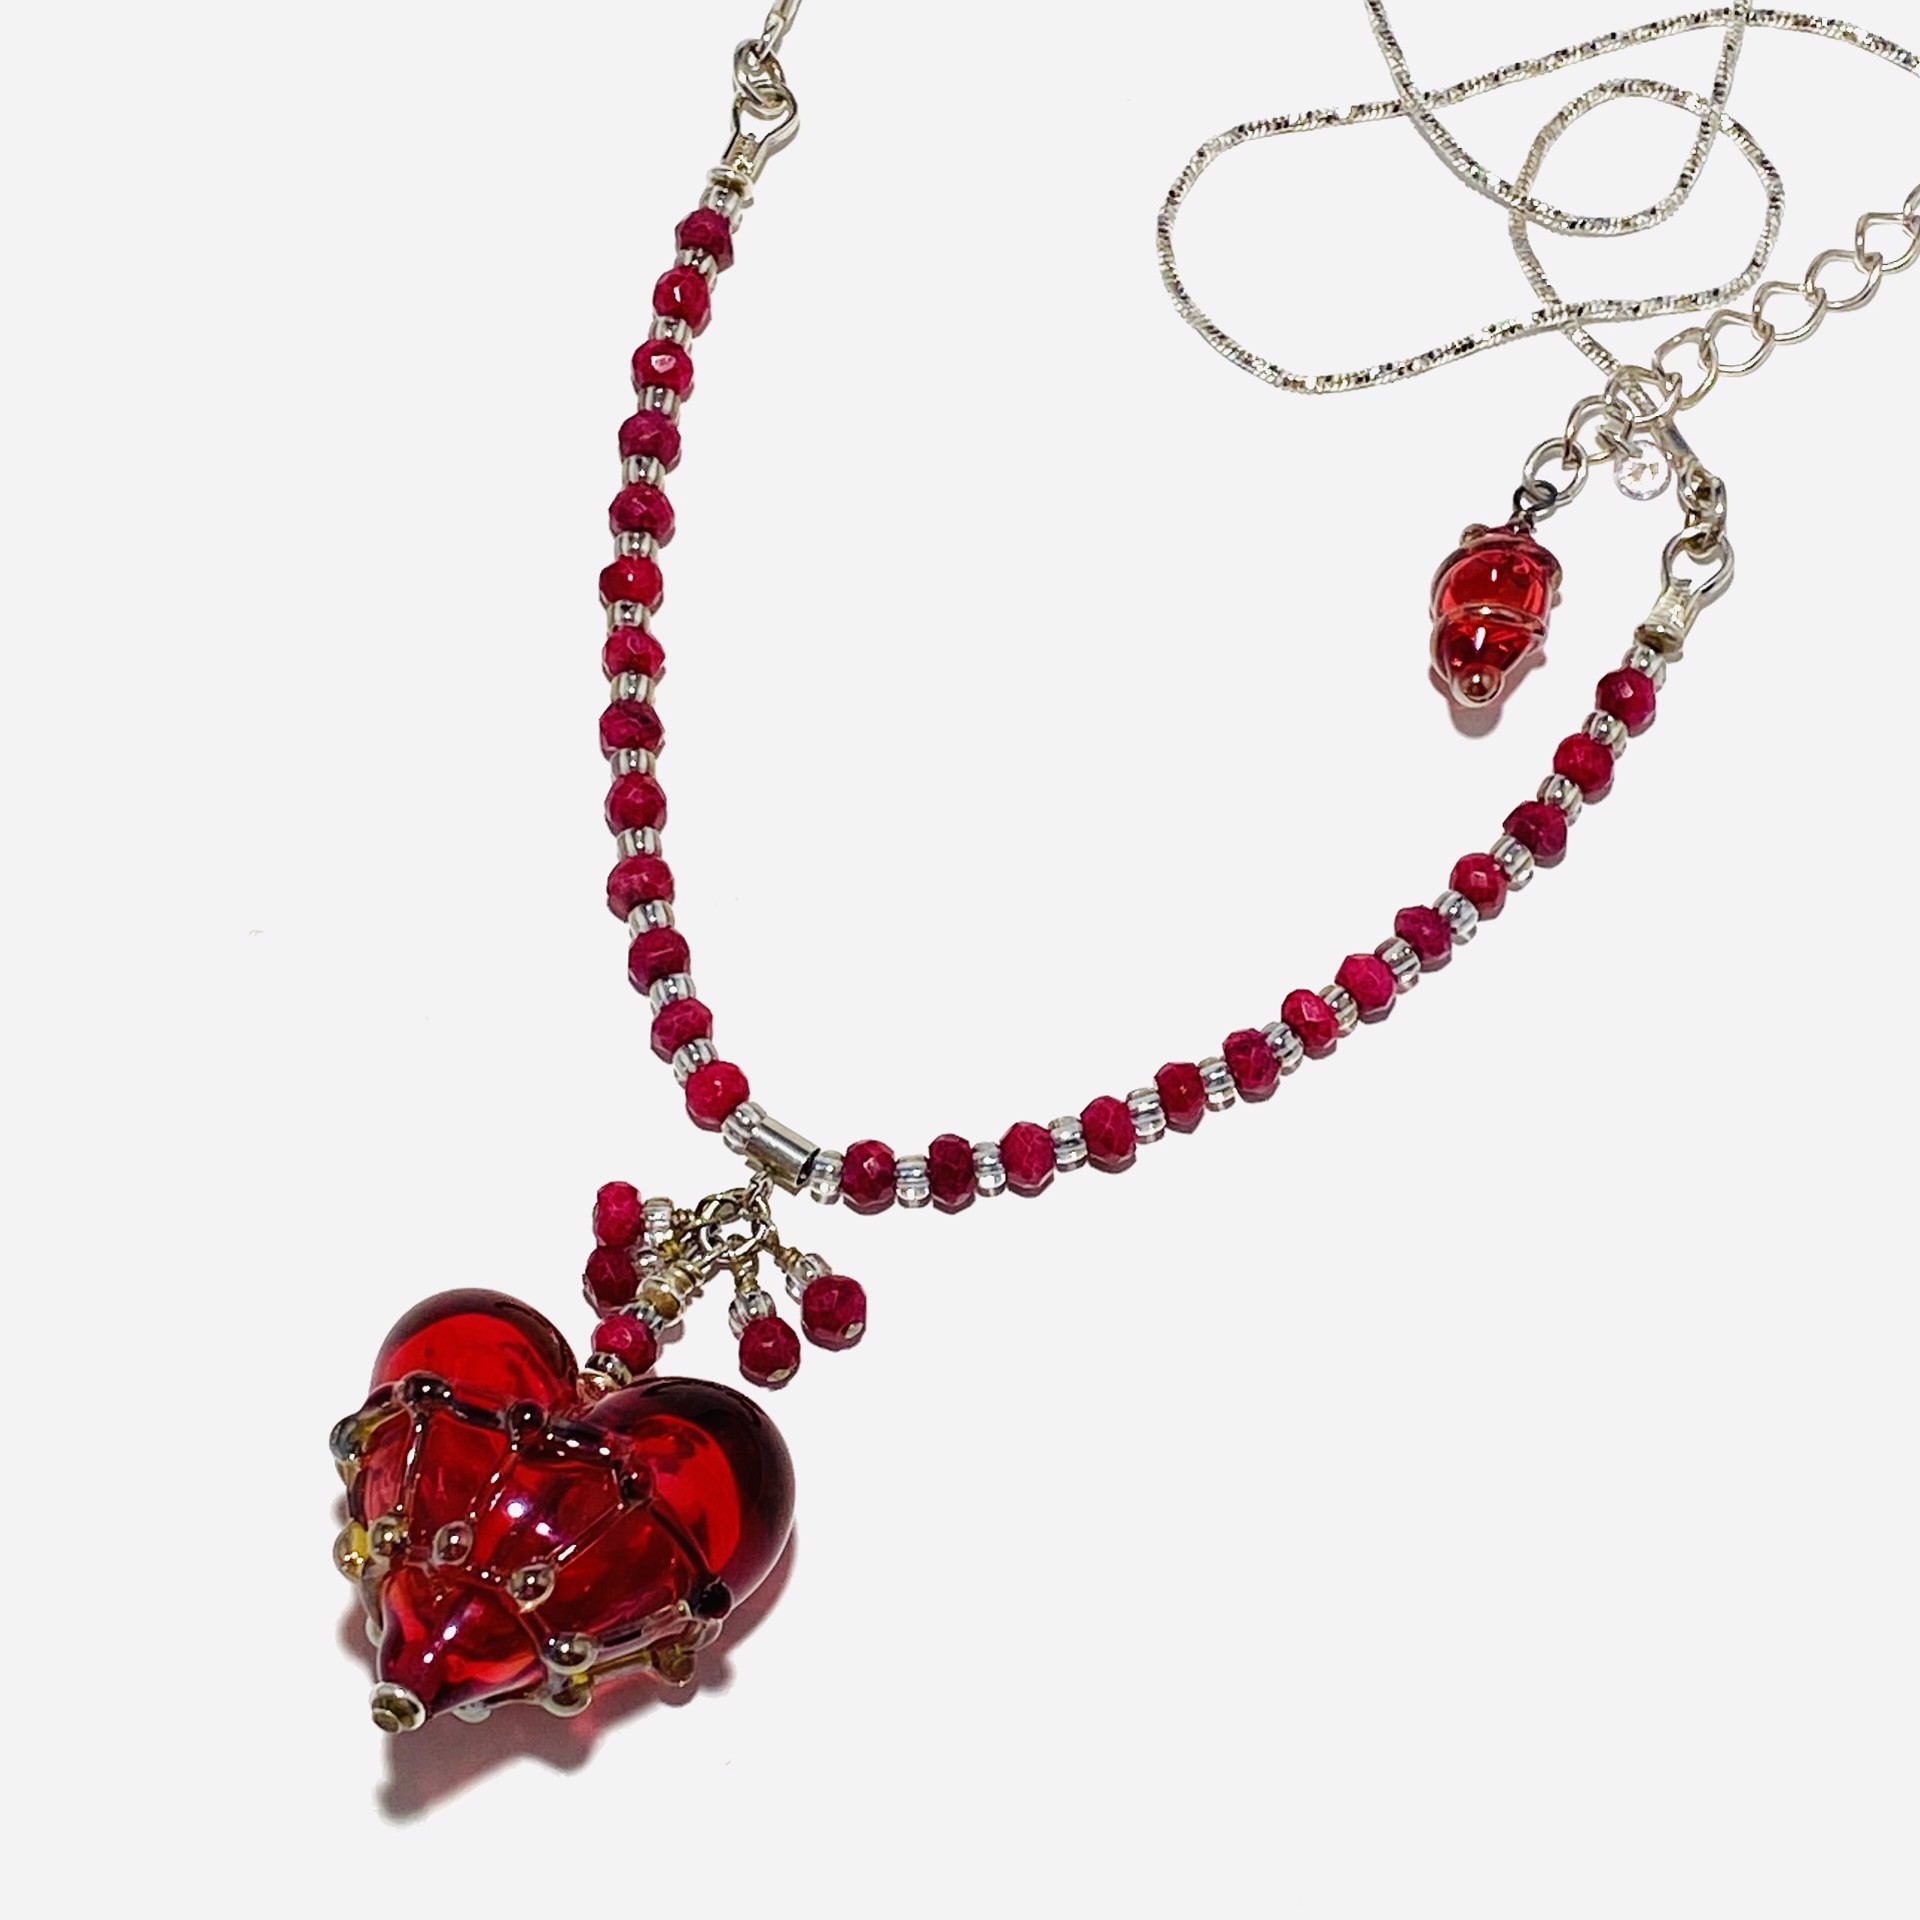 Ruby Gold Notos Cage Heart, Faceted Ruby Bead and Sterling Chain Necklace LS23-5A by Linda Sacra